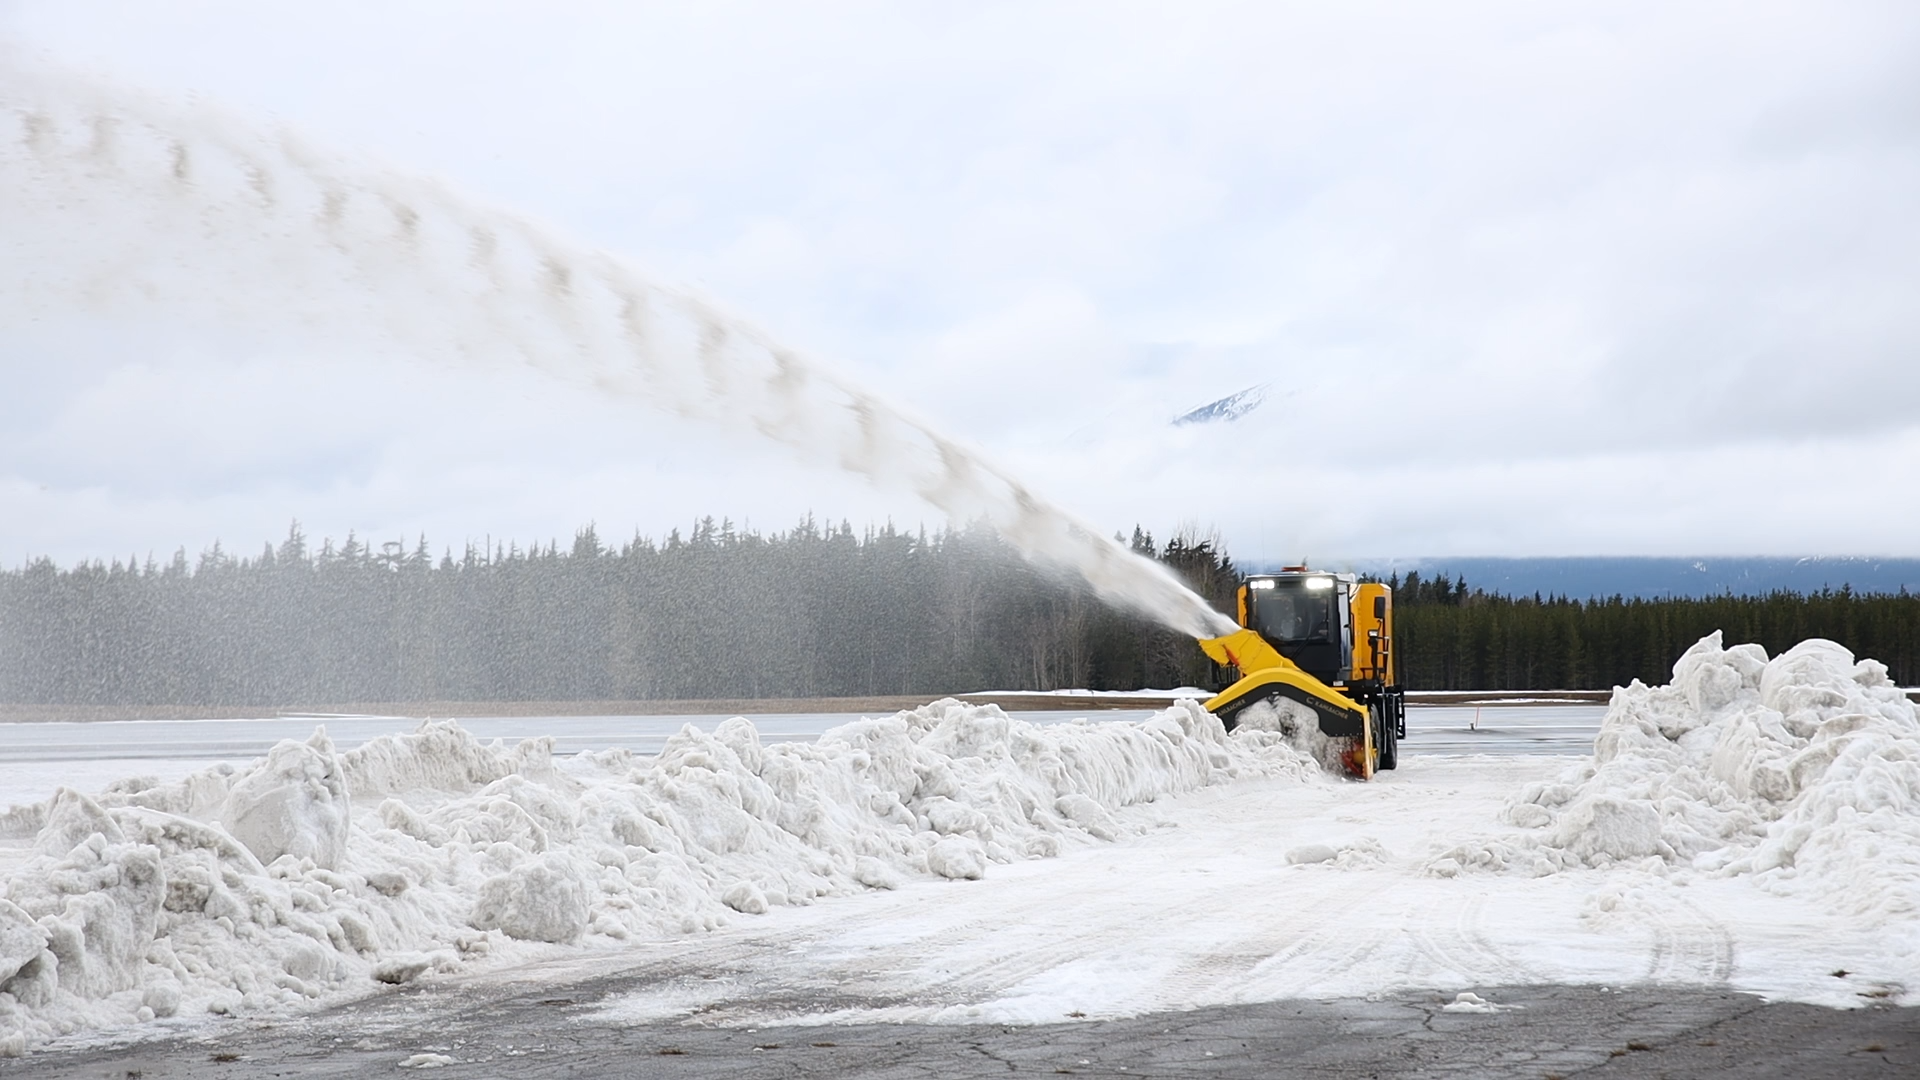 LNG Canada provides $1.2 million in funding towards a new snowblower for Northwest Regional Airport Terrace-Kitimat